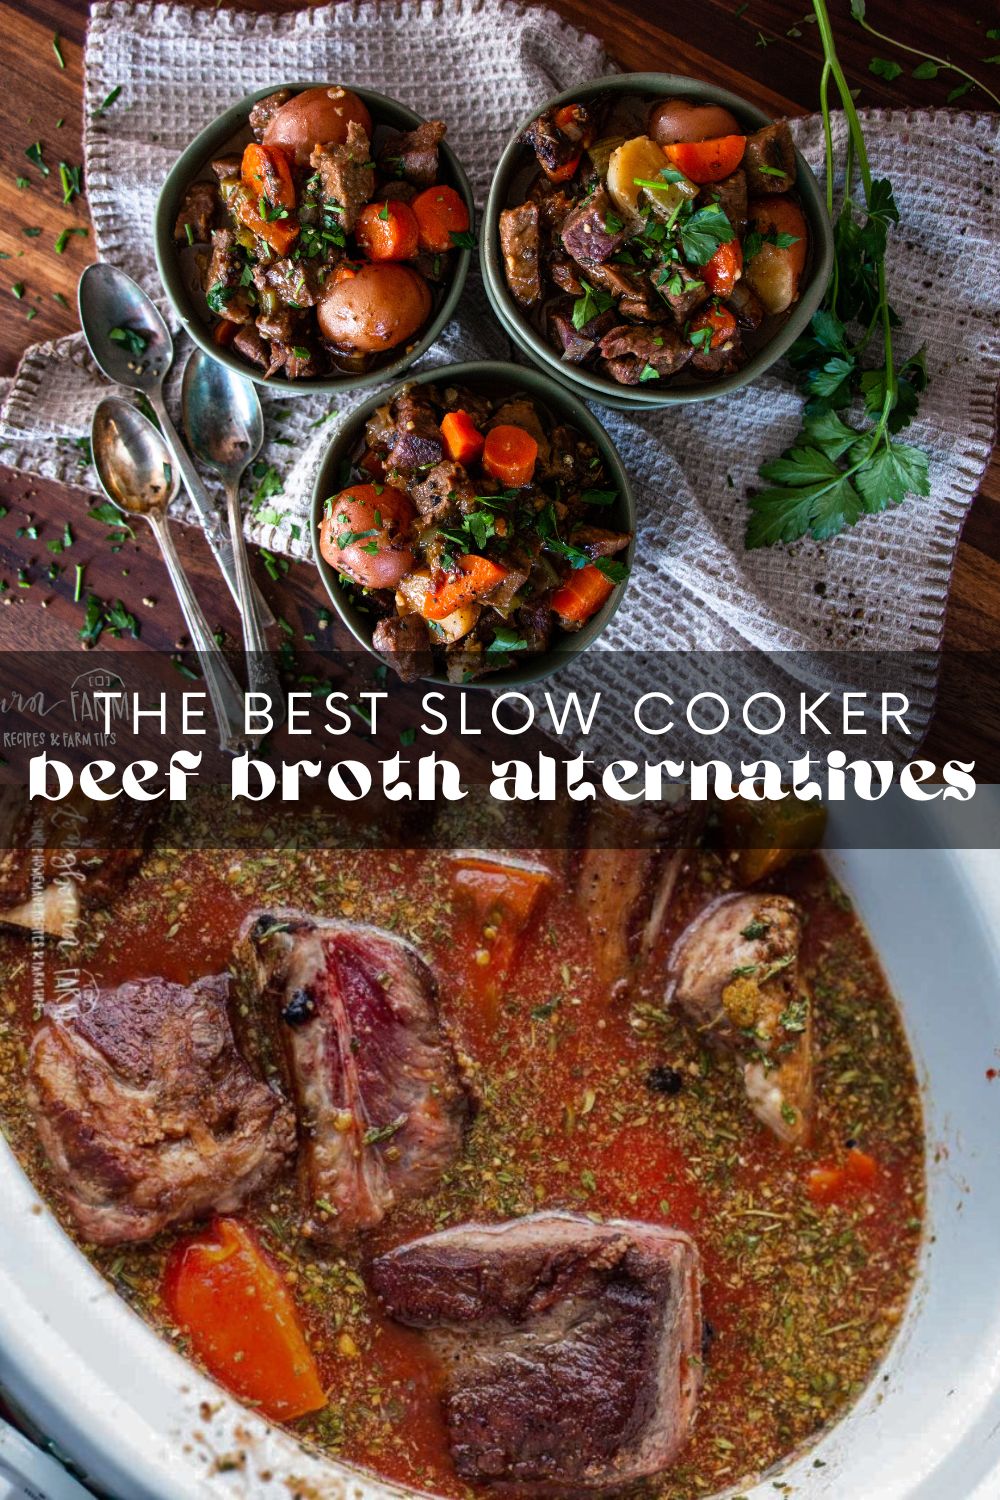 Slow Cooker Alternatives: Slow Cooking Without a Slow Cooker